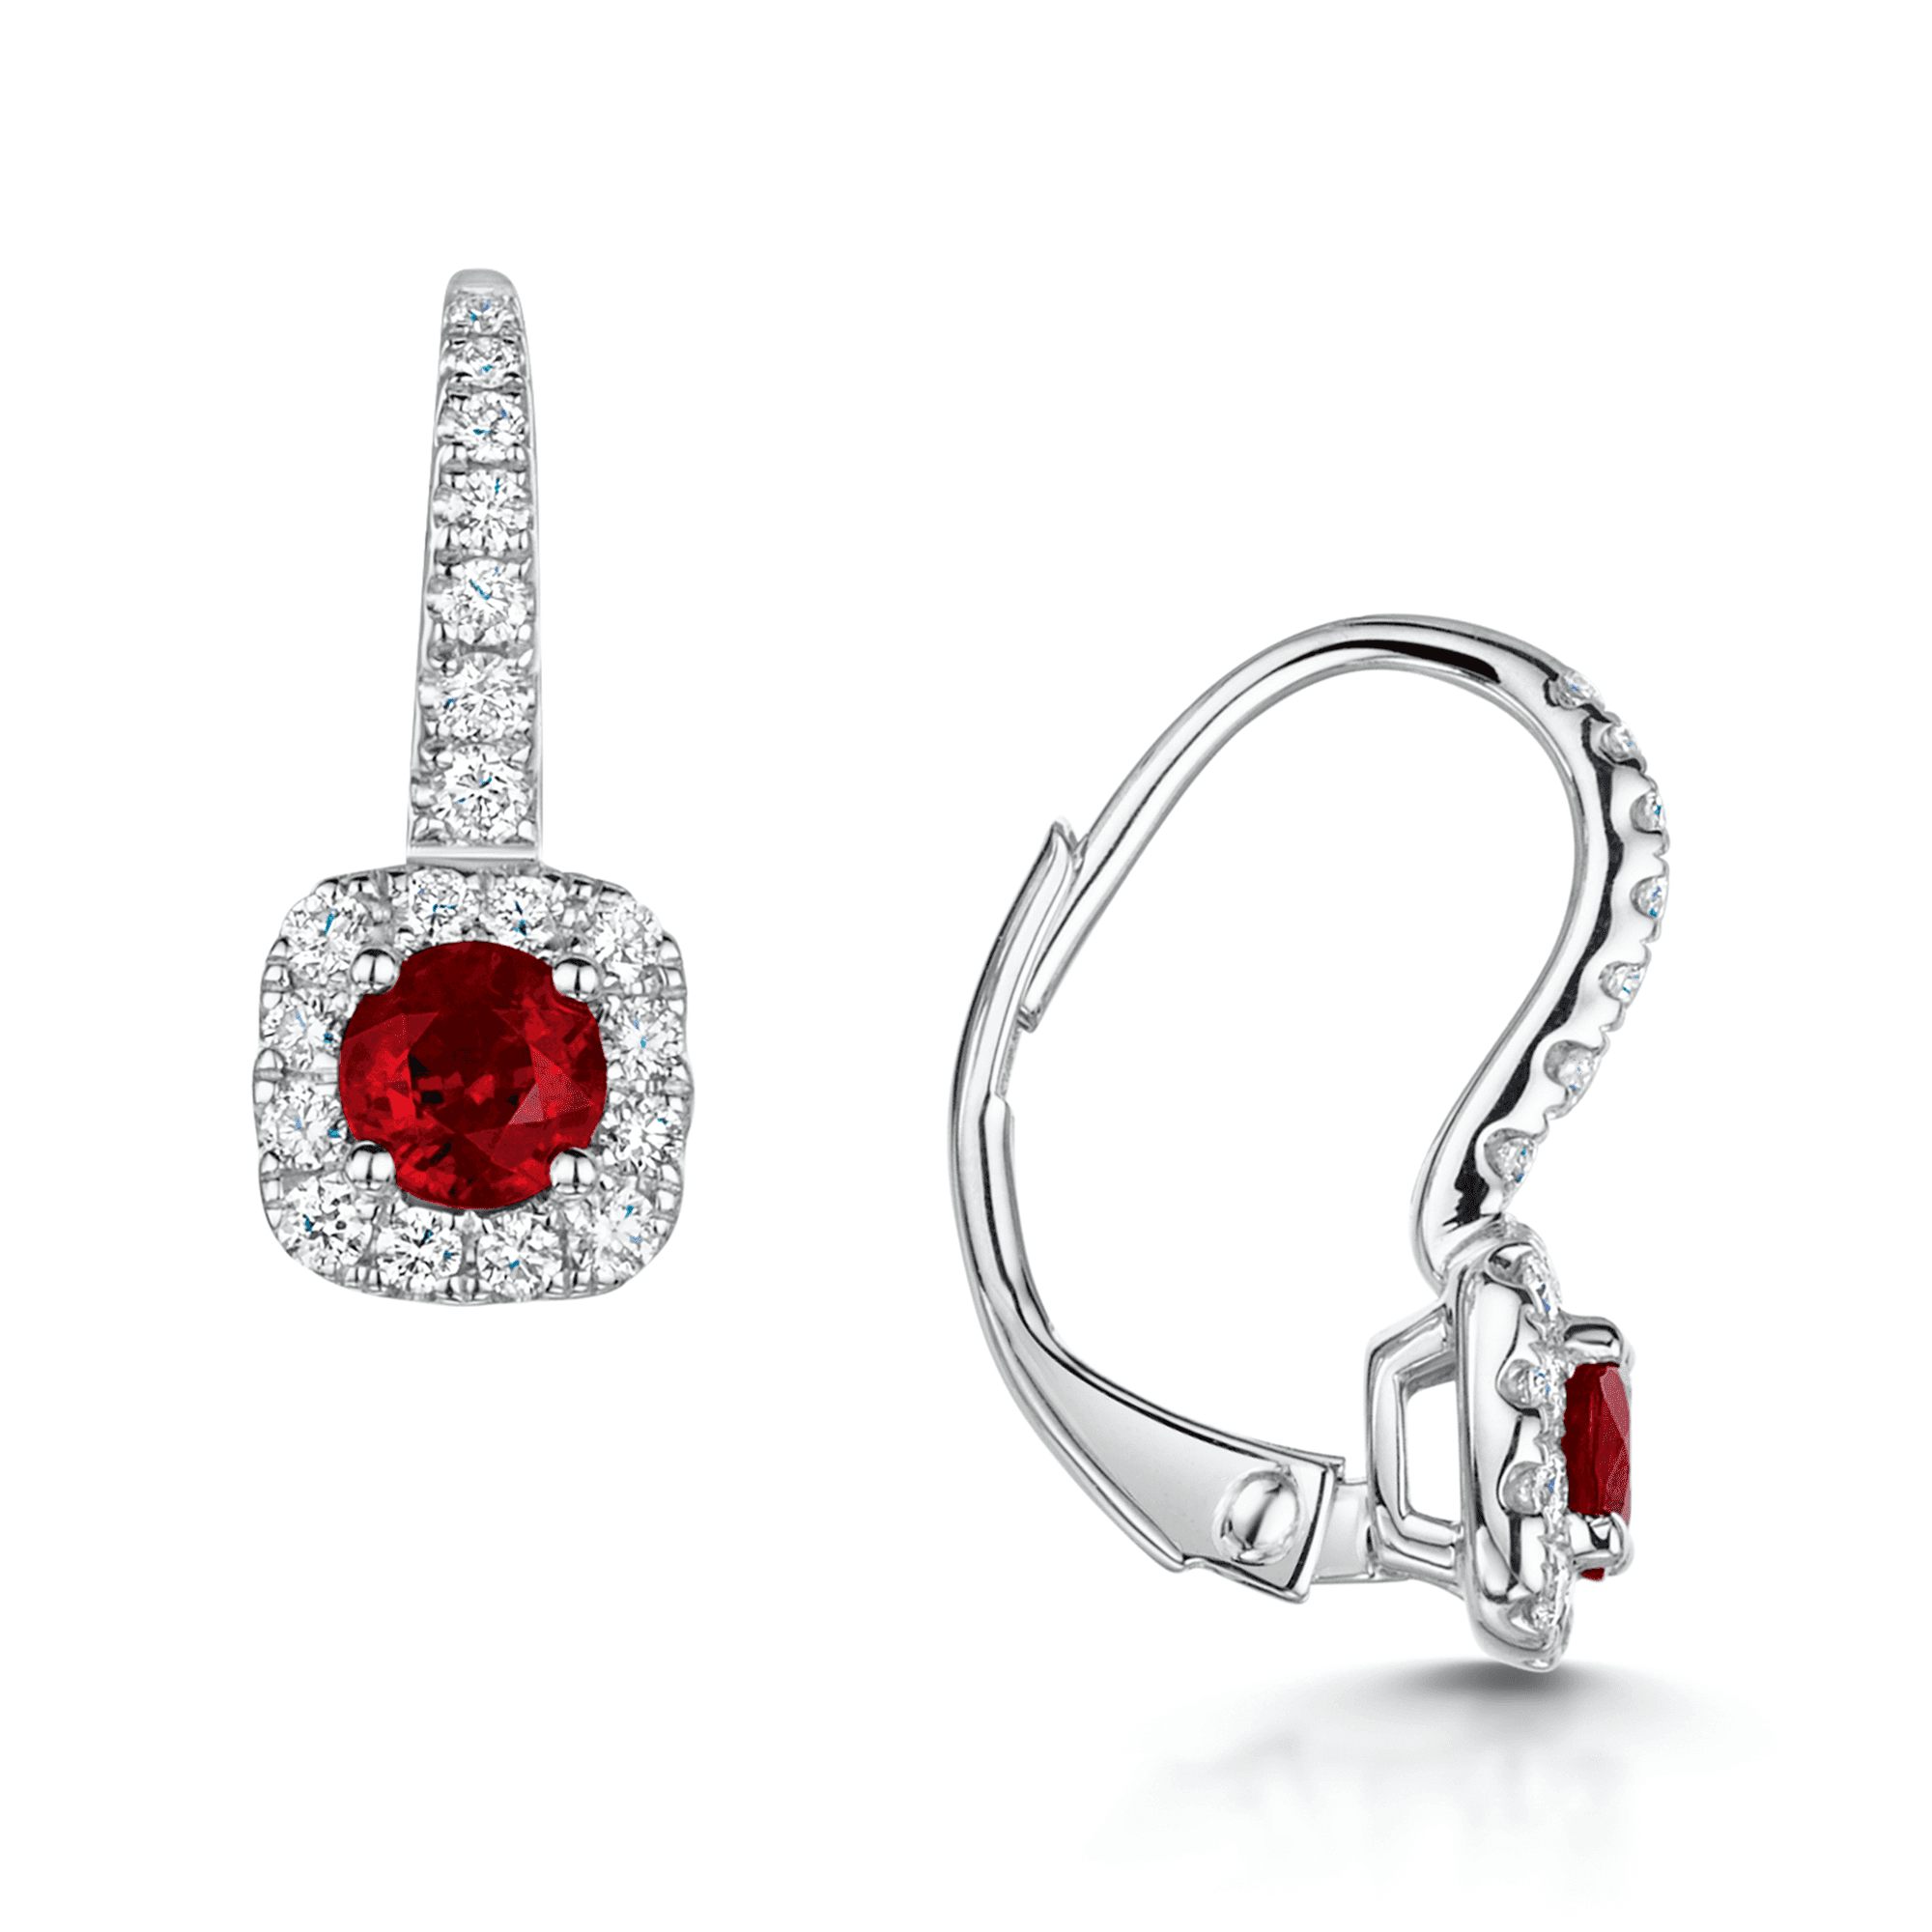 18ct White Gold Round Brilliant Cut Ruby And Diamond Halo Fancy Hoop Earrings